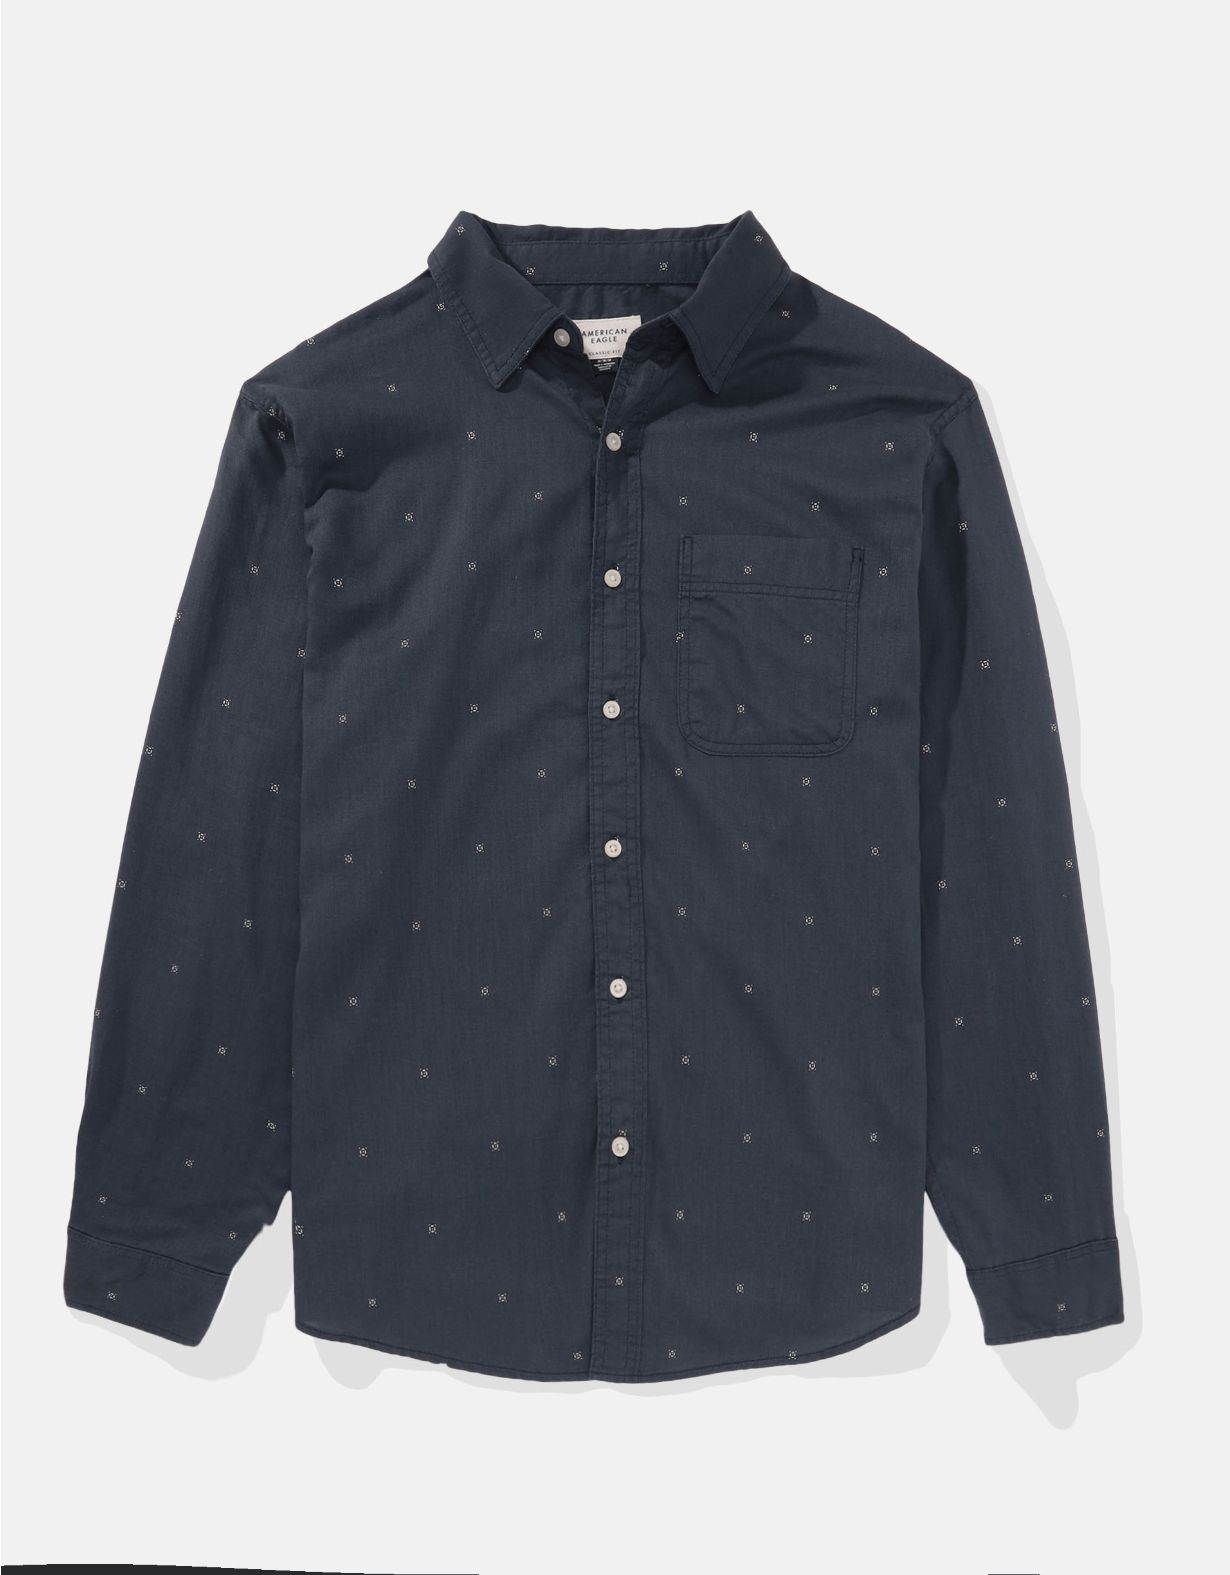 AE Slim Fit Everyday Oxford Button-Up Shirt